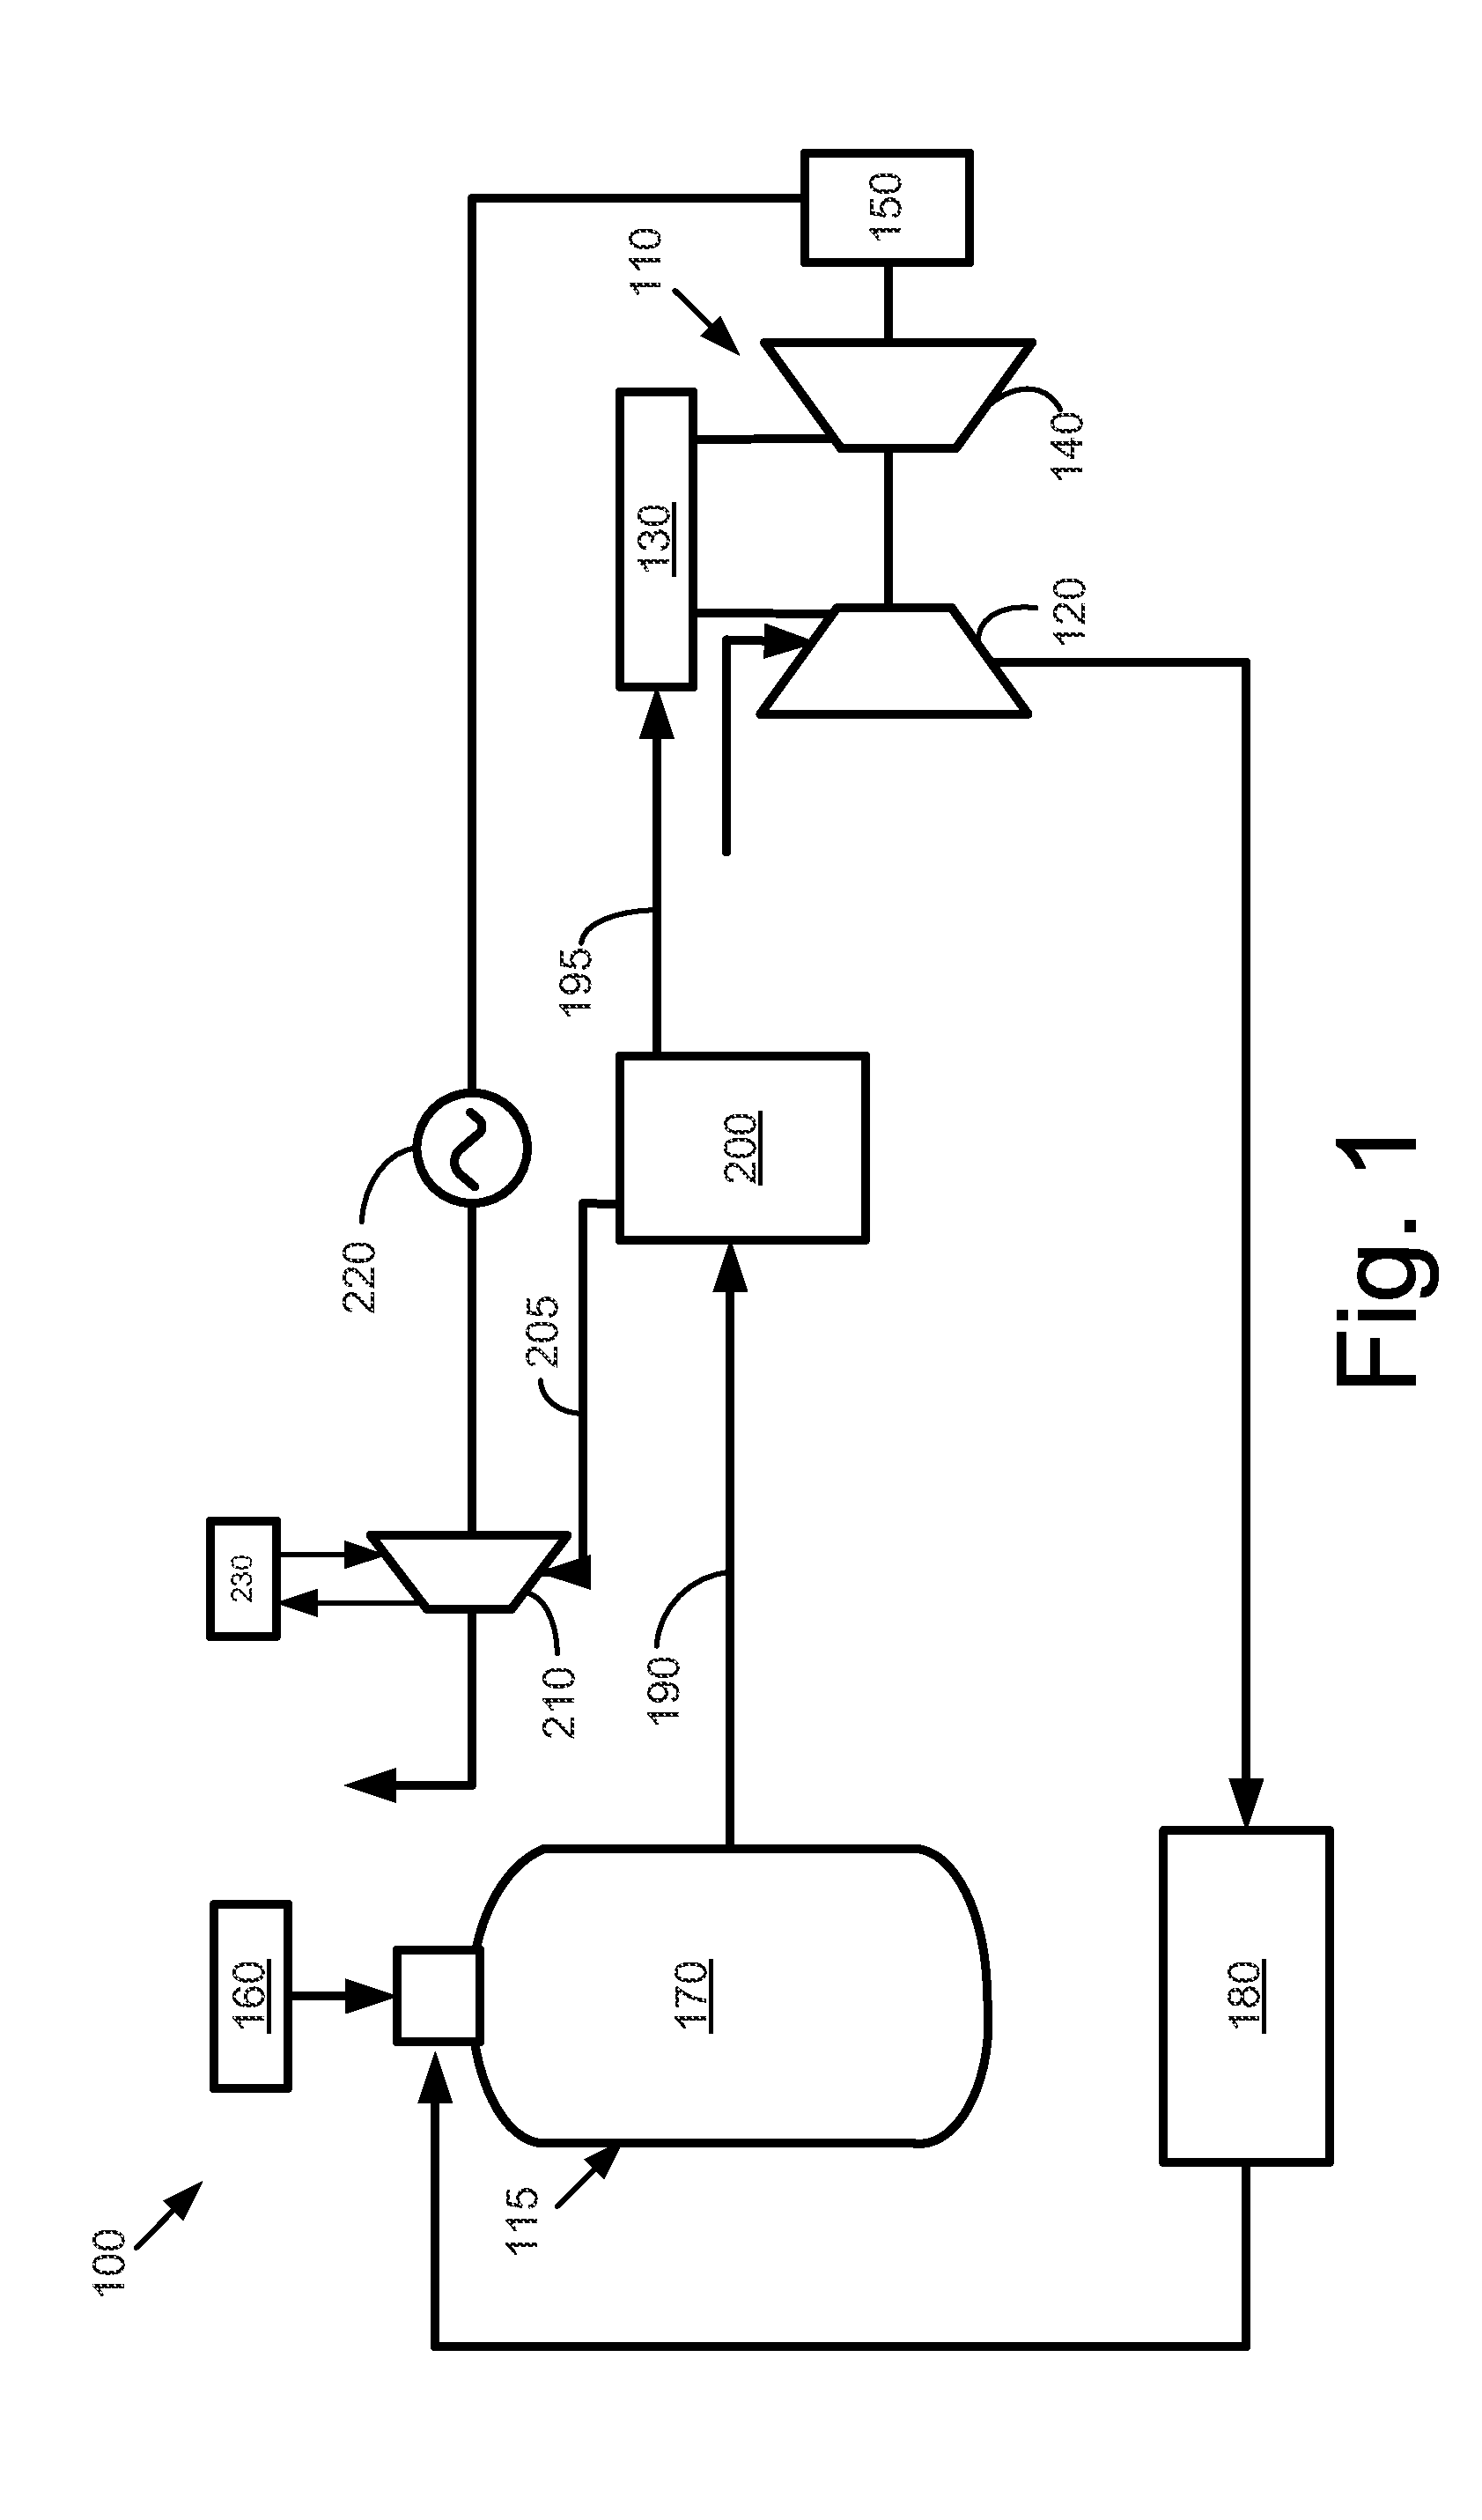 Integrated Gasification Combined Cycle System with Vapor Absorption Chilling